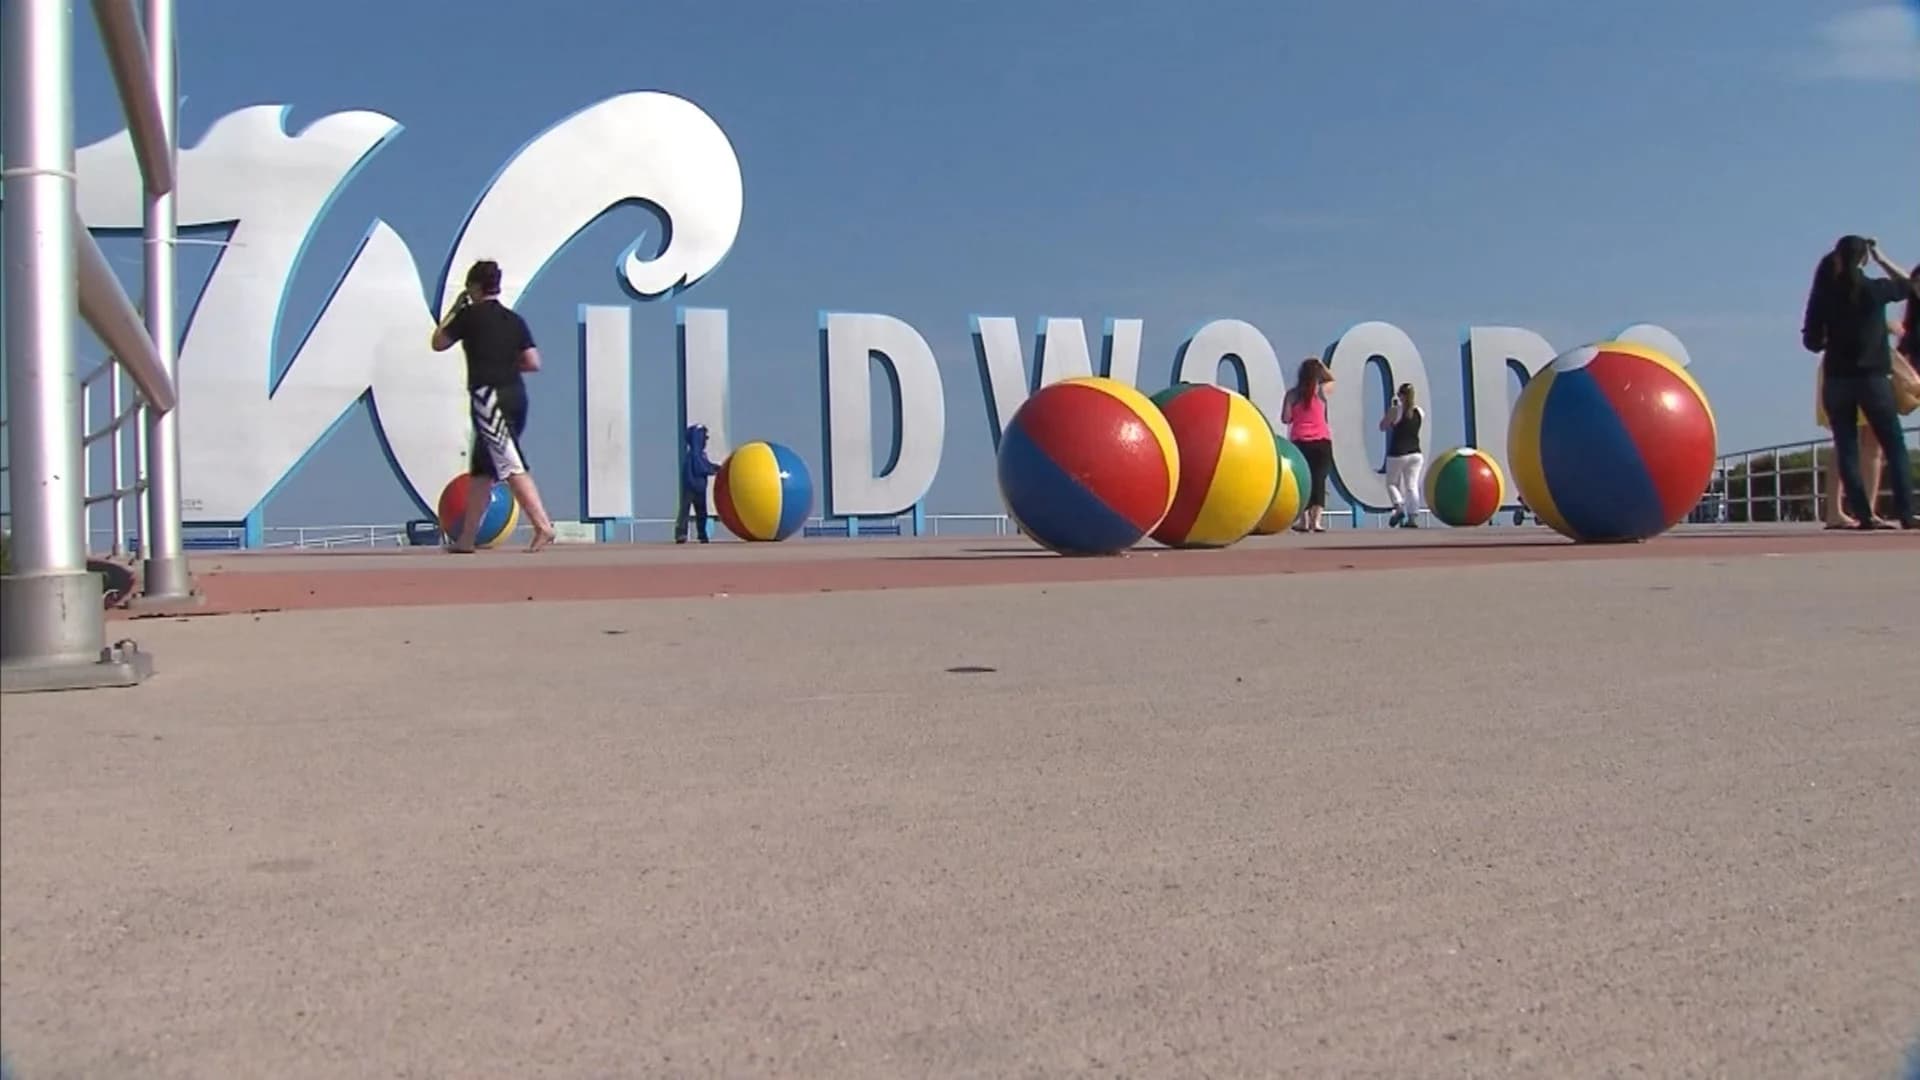 3-day country music festival coming to Wildwood announces third headliner